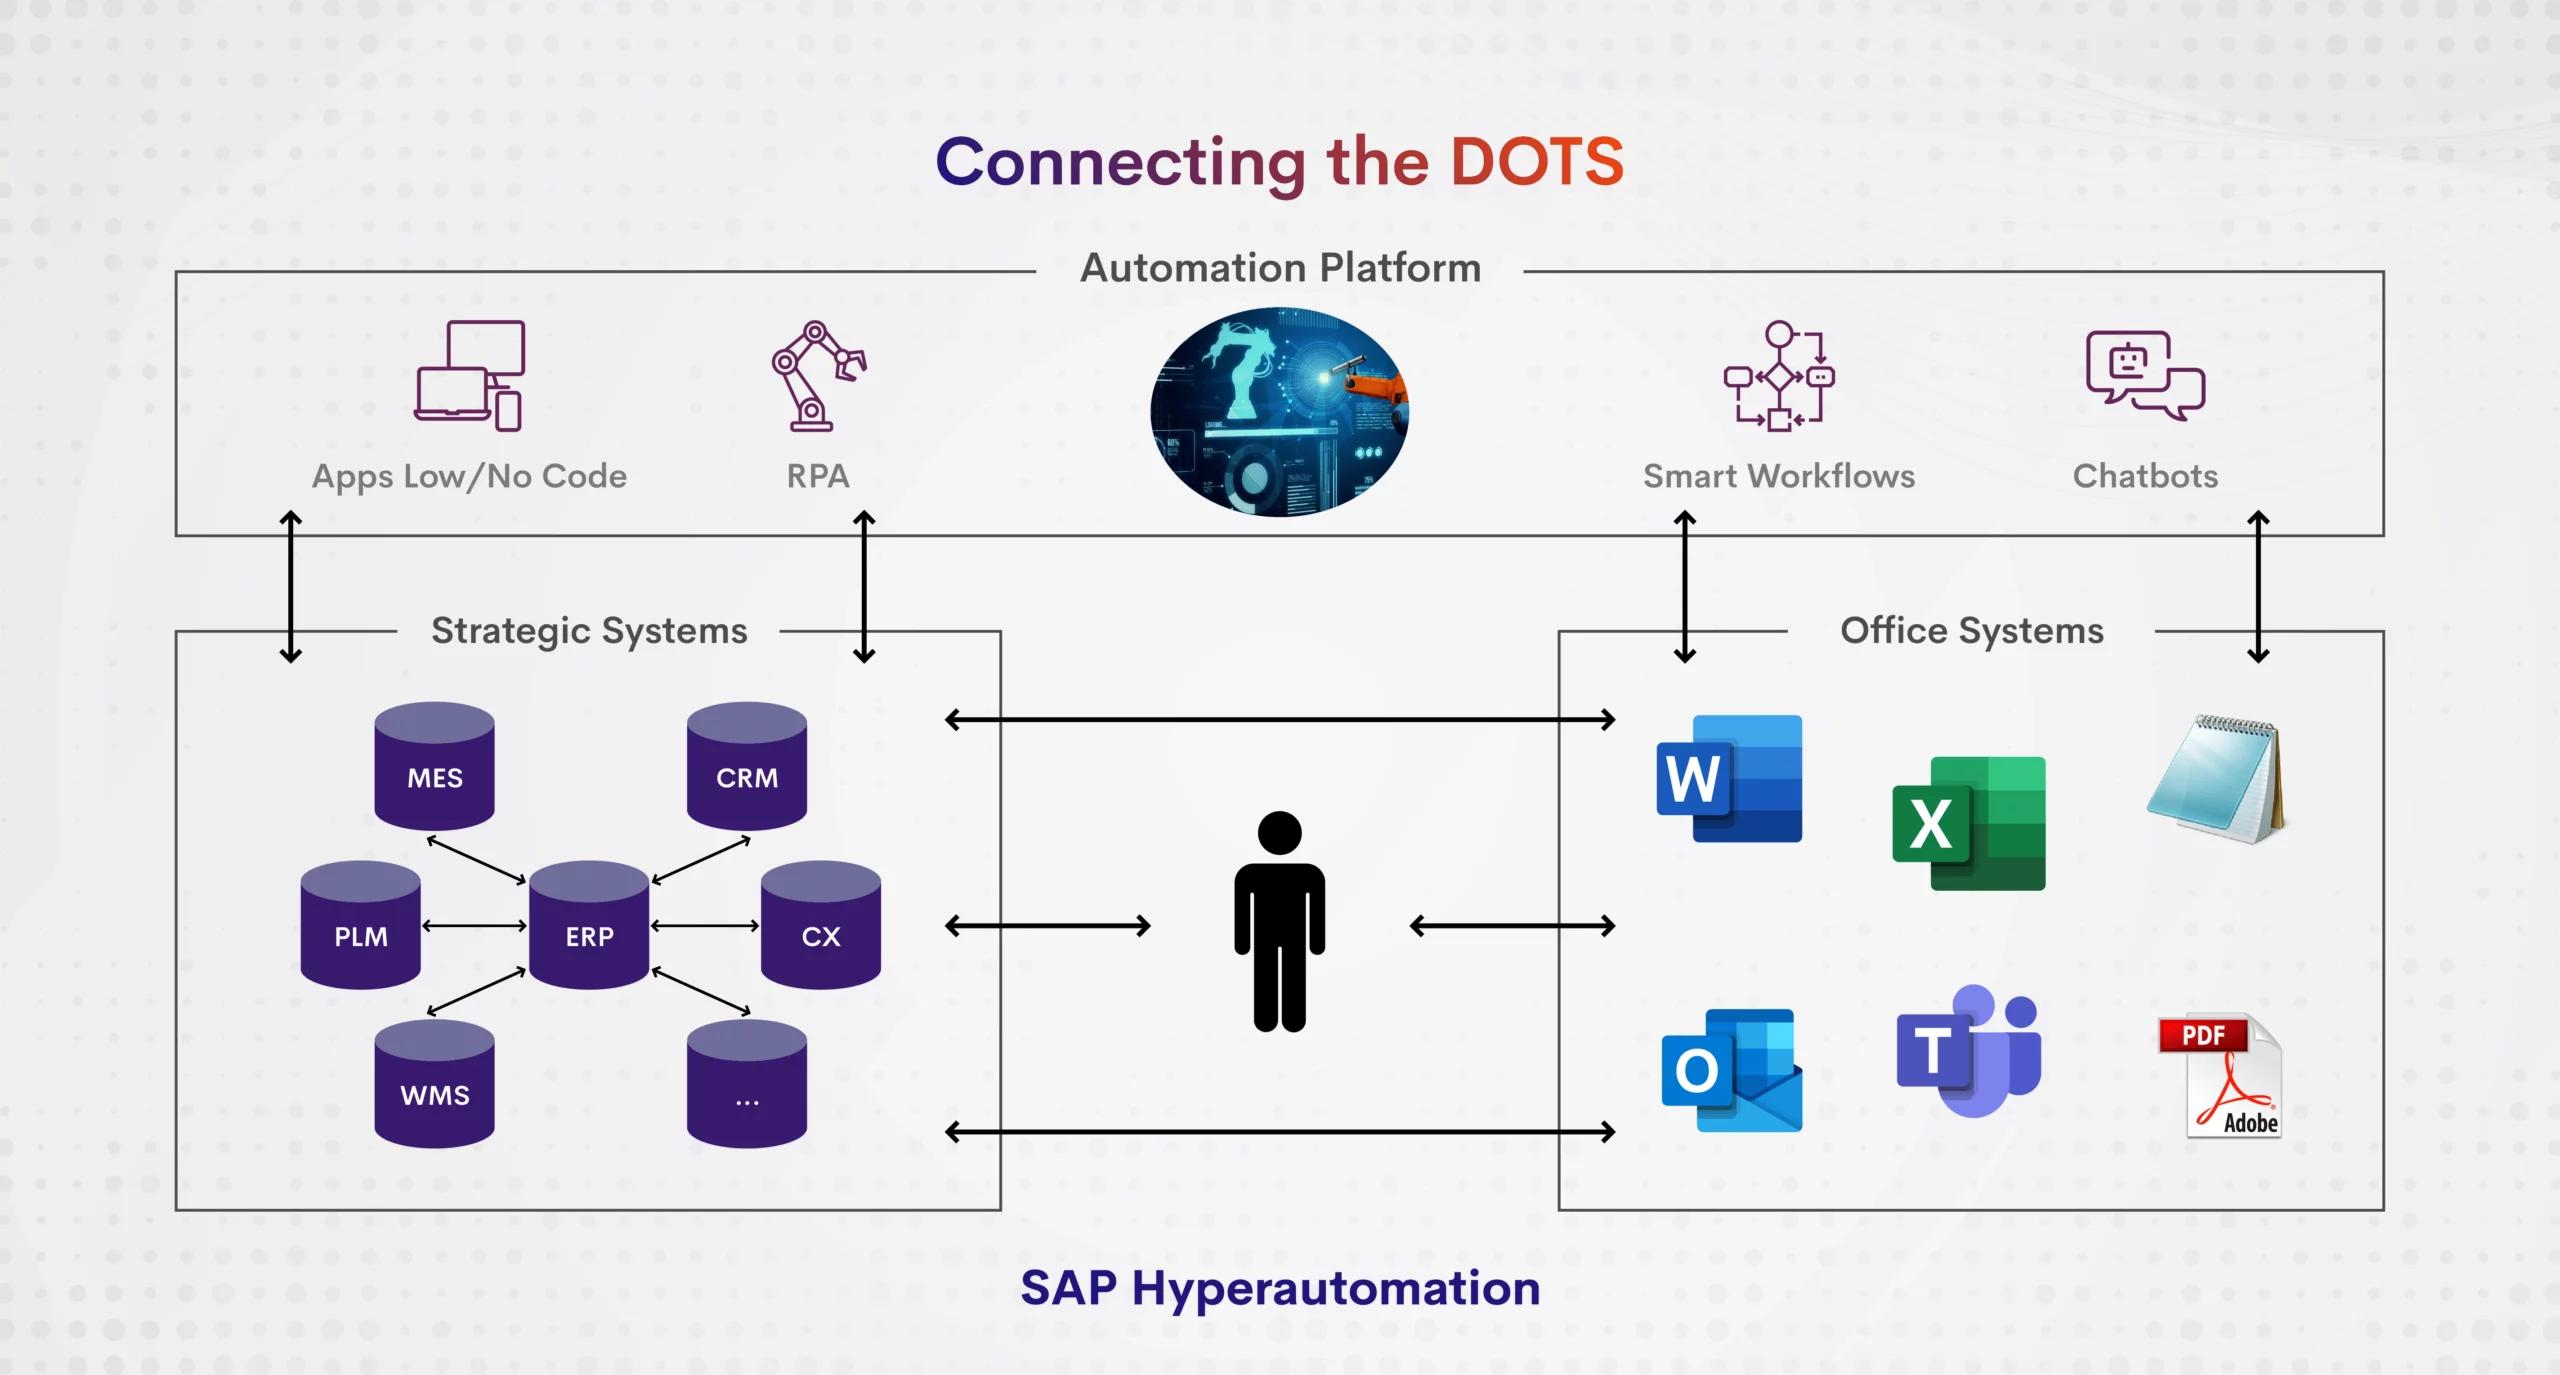 SAP HyperAutomation Connecting the Dots